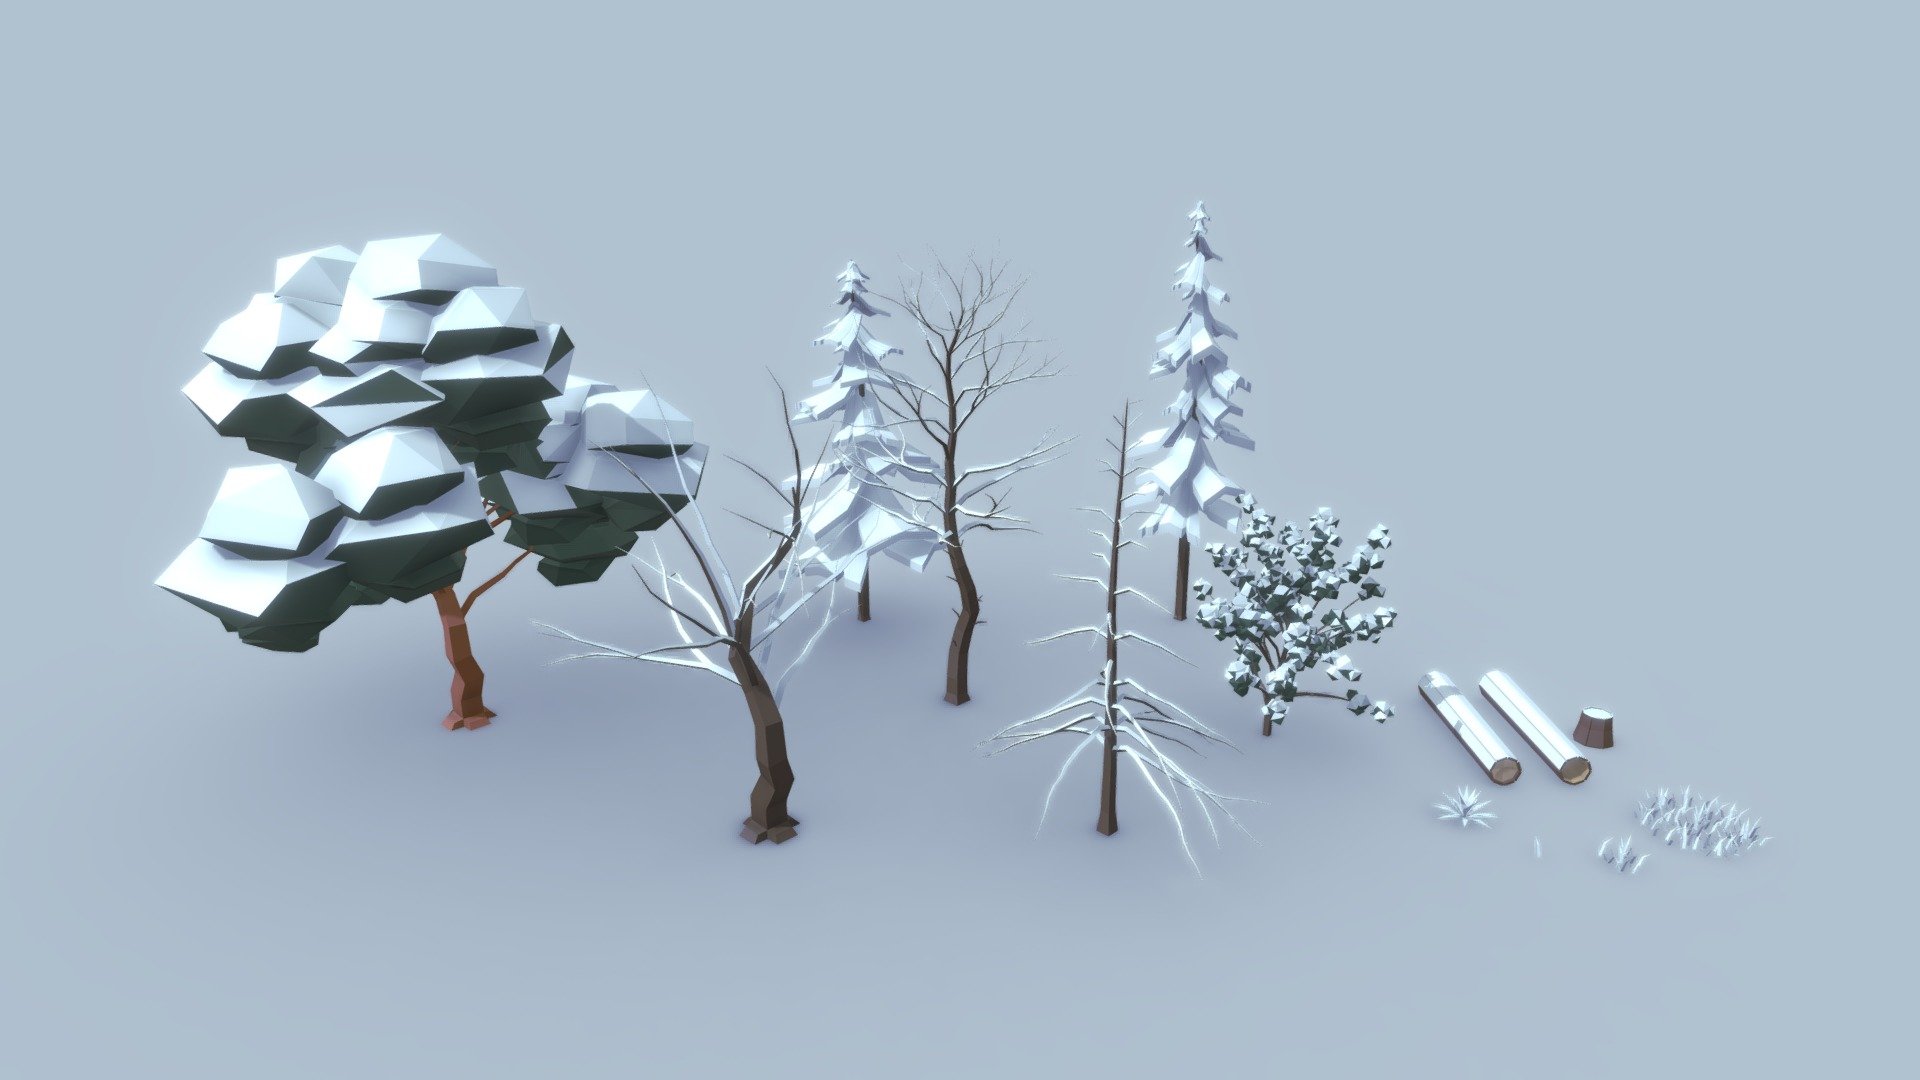 This is a low-poly environment asset pack with a variety of snow covered models. All models use a single material and texture 3d model